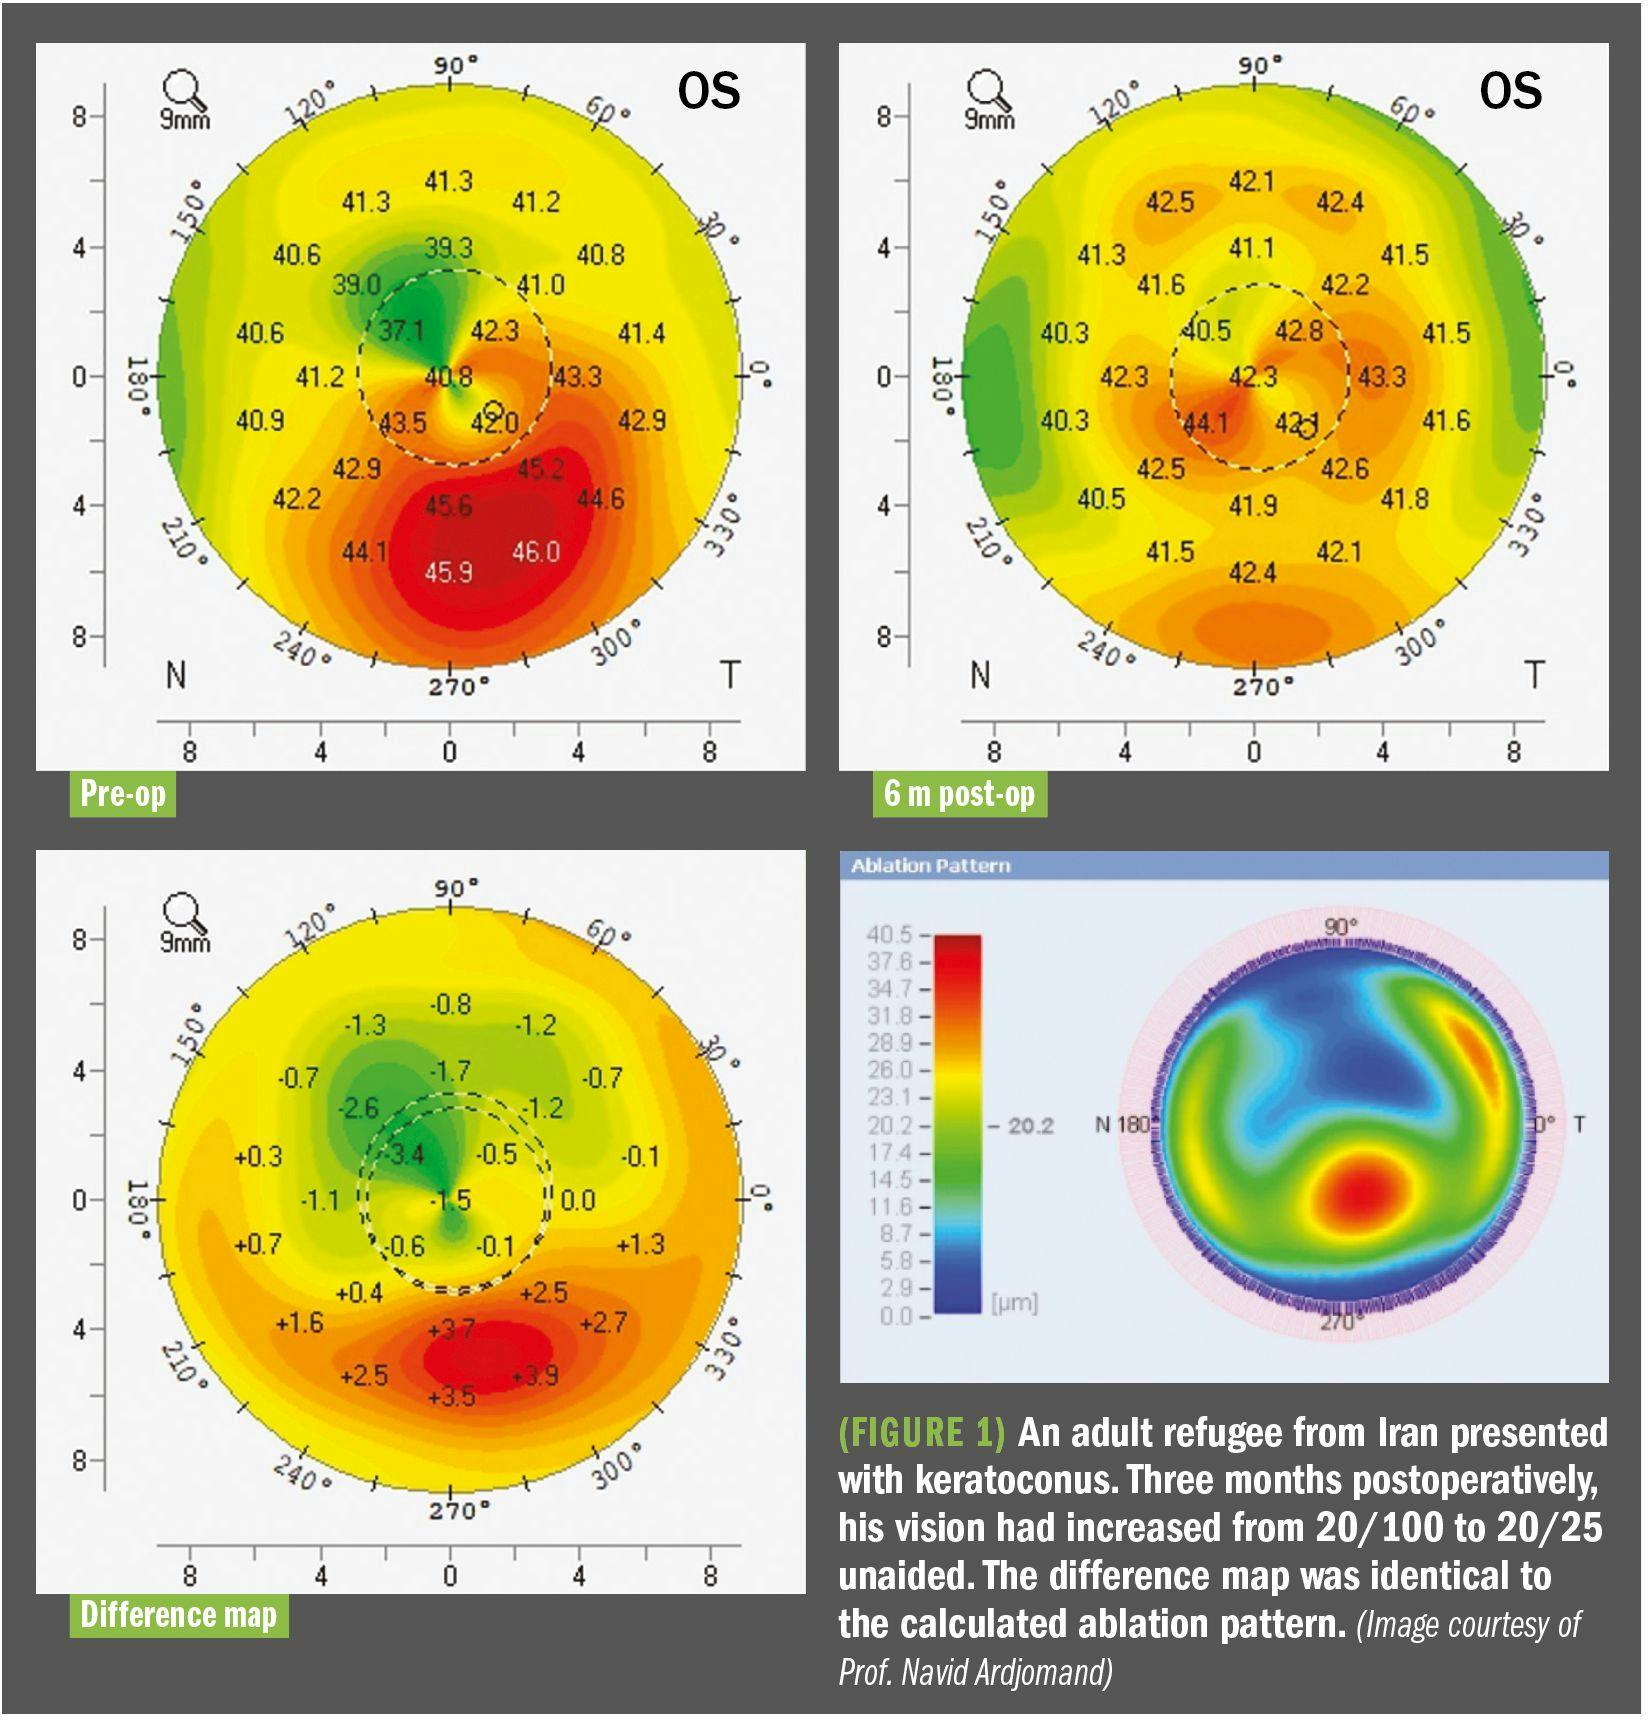 graphs showing visual difference in patient with keratoconus with treatment